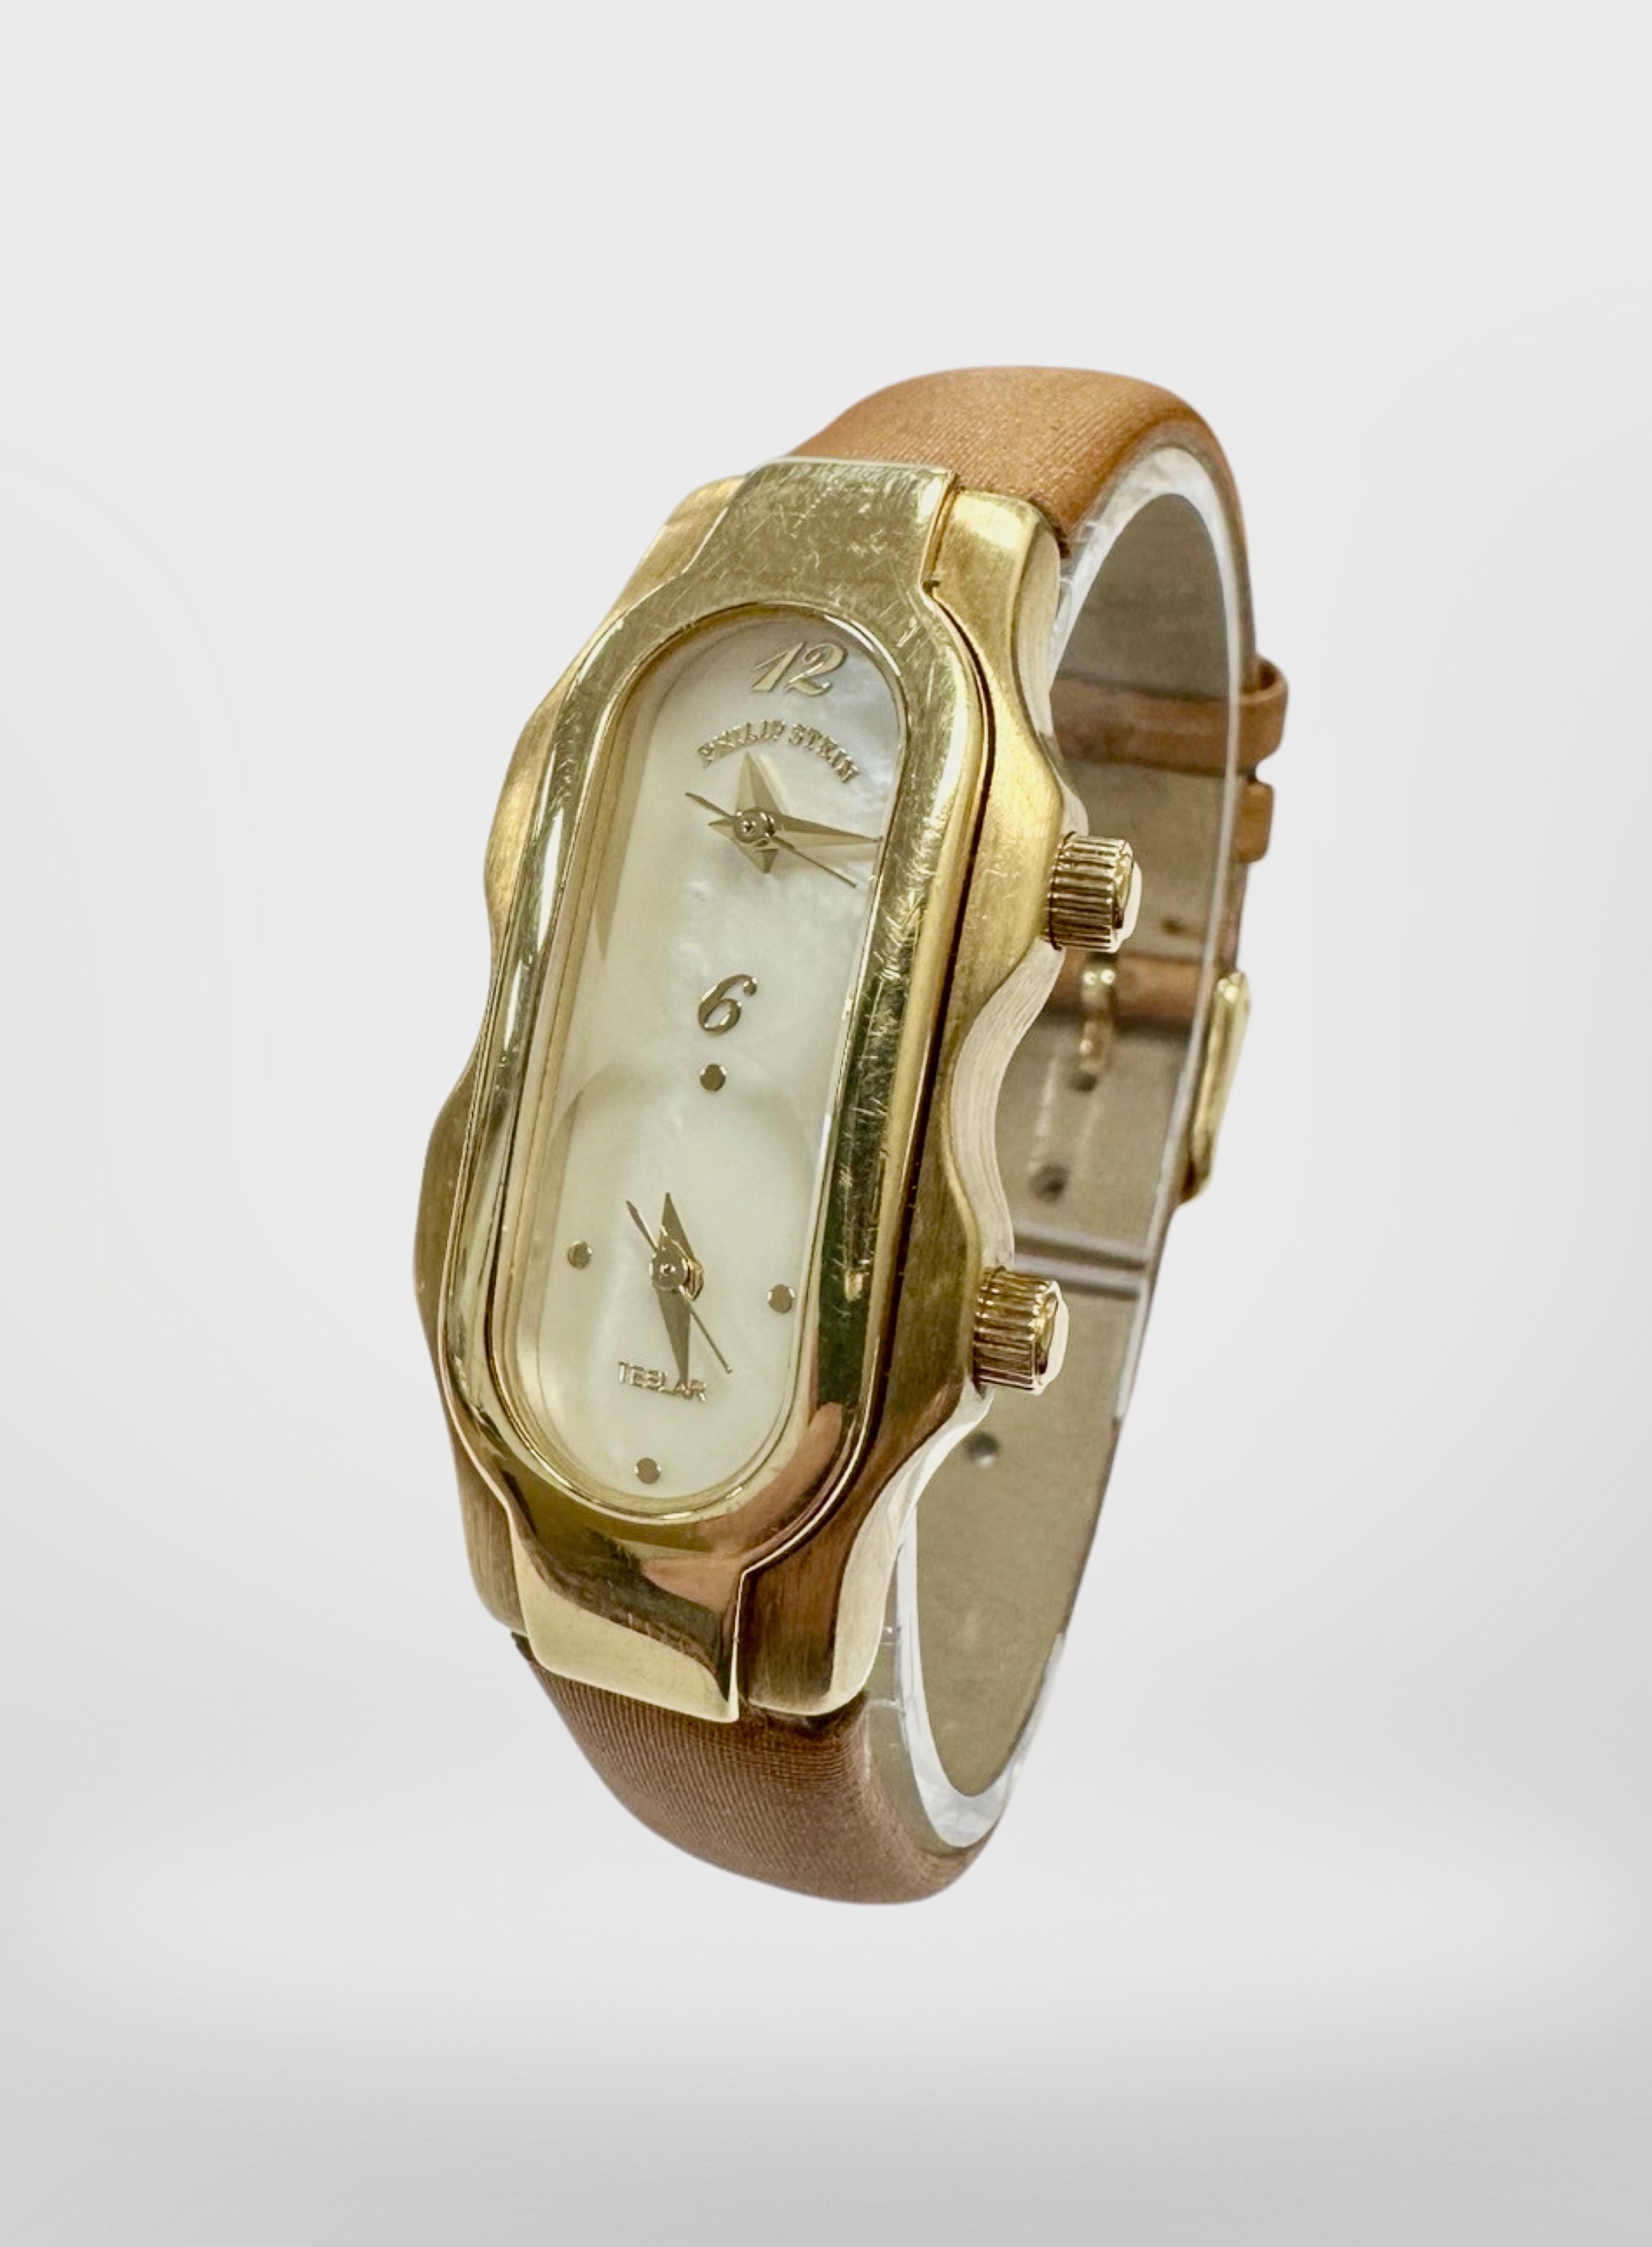 An 18ct yellow gold lady's wrist watch by Philip Stein, with Teslar Quantum technology,